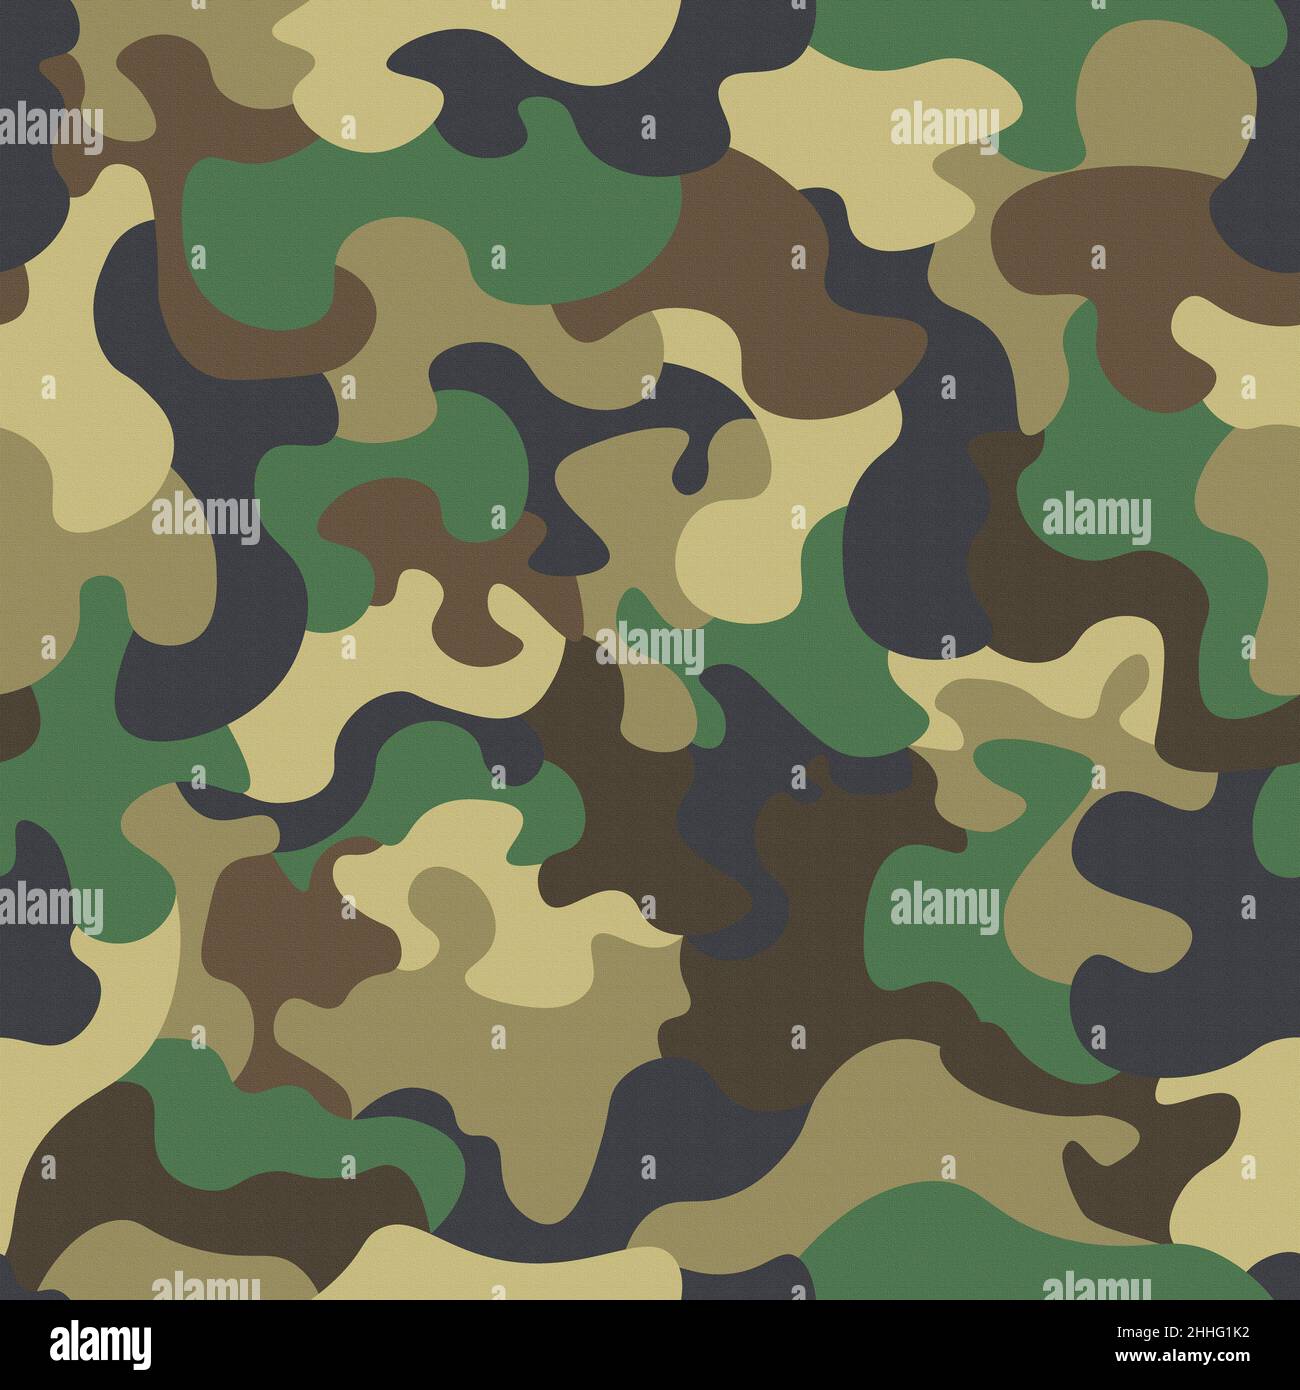 Camouflage seamless pattern. Abstract modern military background for army textile and clothing Stock Photo